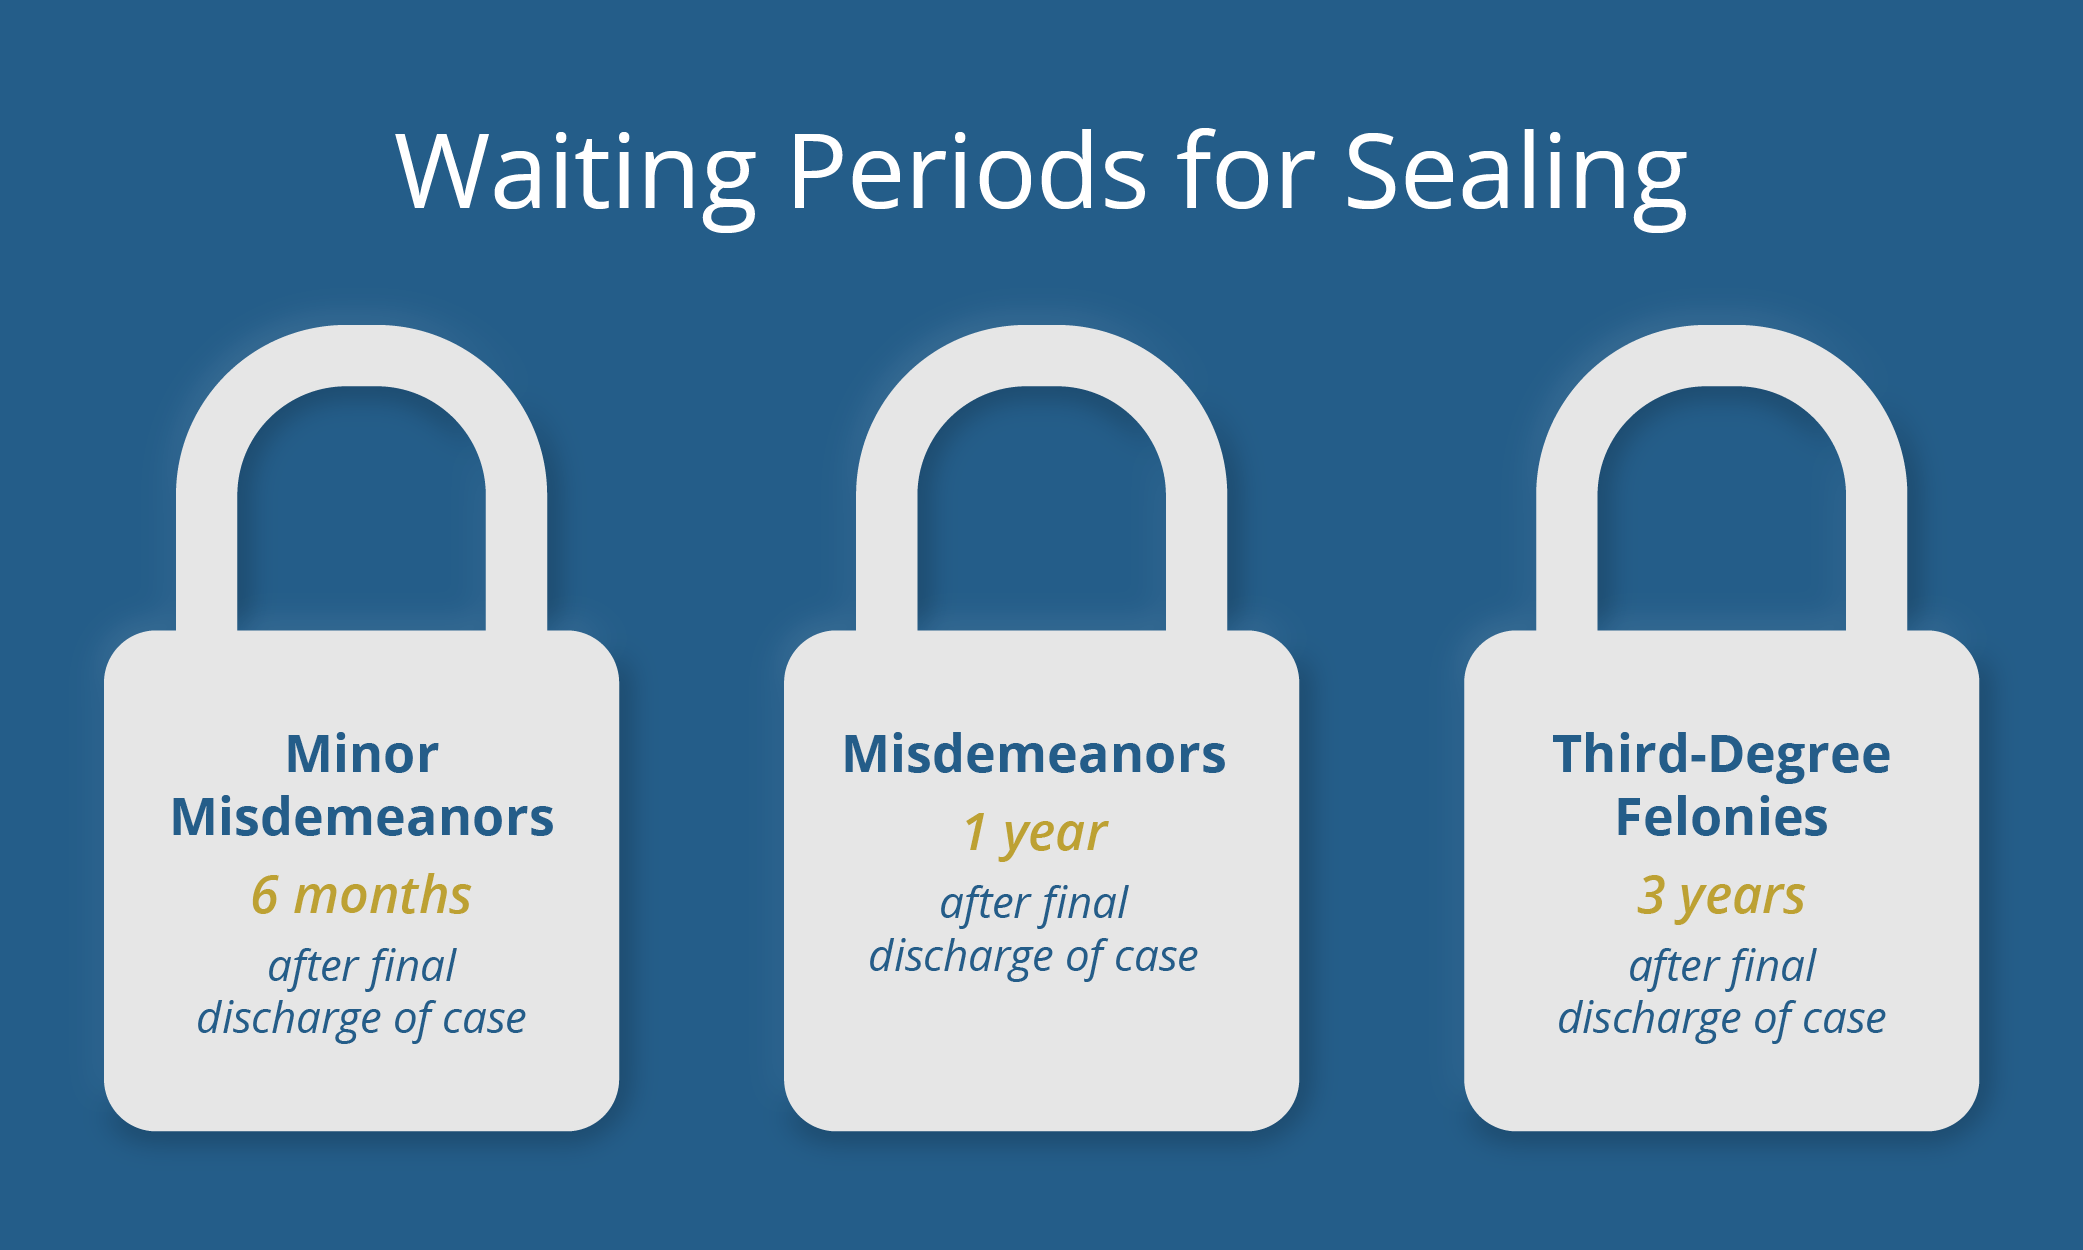 Infographic showing three padlocks. The first padlock says 'Minor Misdemeanors 6 months after final discharge of case.' The second padlock says 'Misdemeanors 1 year after final discharge of case.' The third padlock says 'Third-Degree Felonies 3 years after final discharge of case.' The top of the infographic says 'Waiting periods for sealing.'